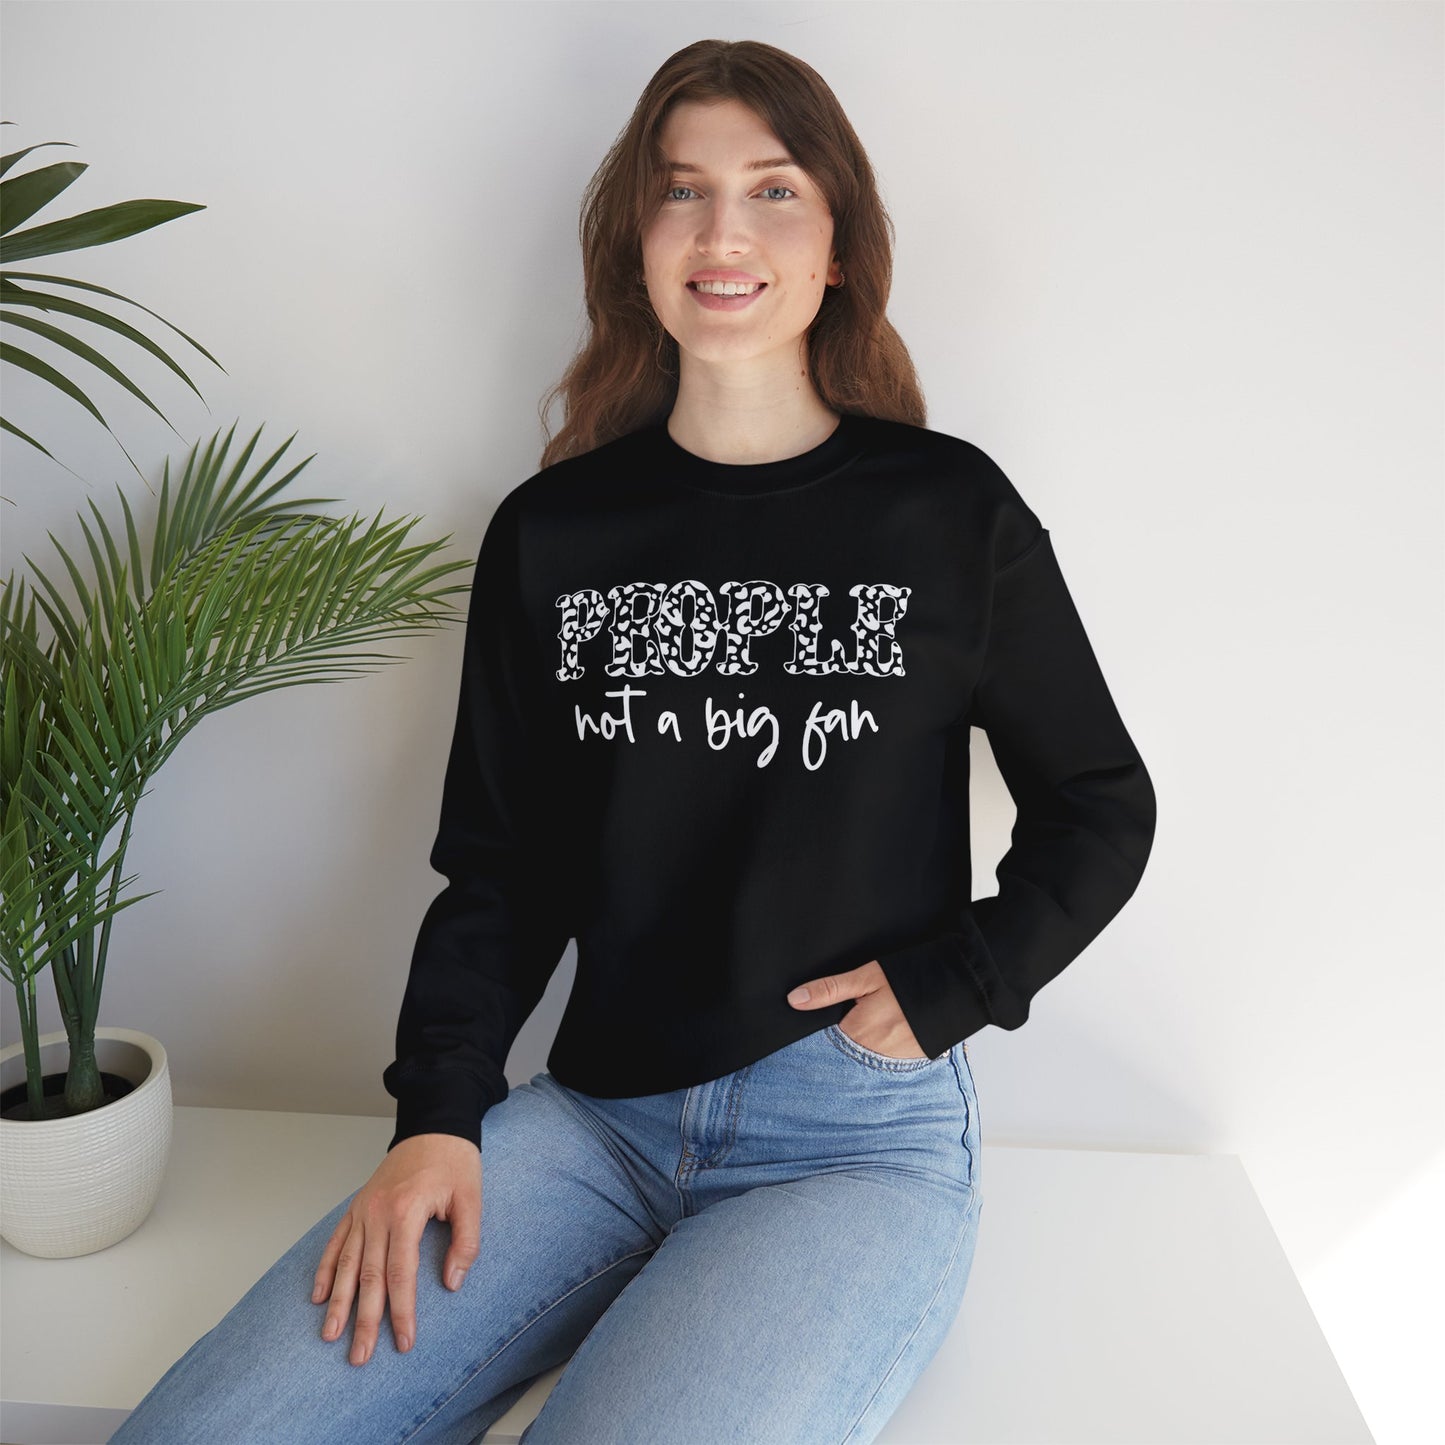 Discover Humor and Style with People Not a Fan – A Funny Shirt with Striking Animal Print Font